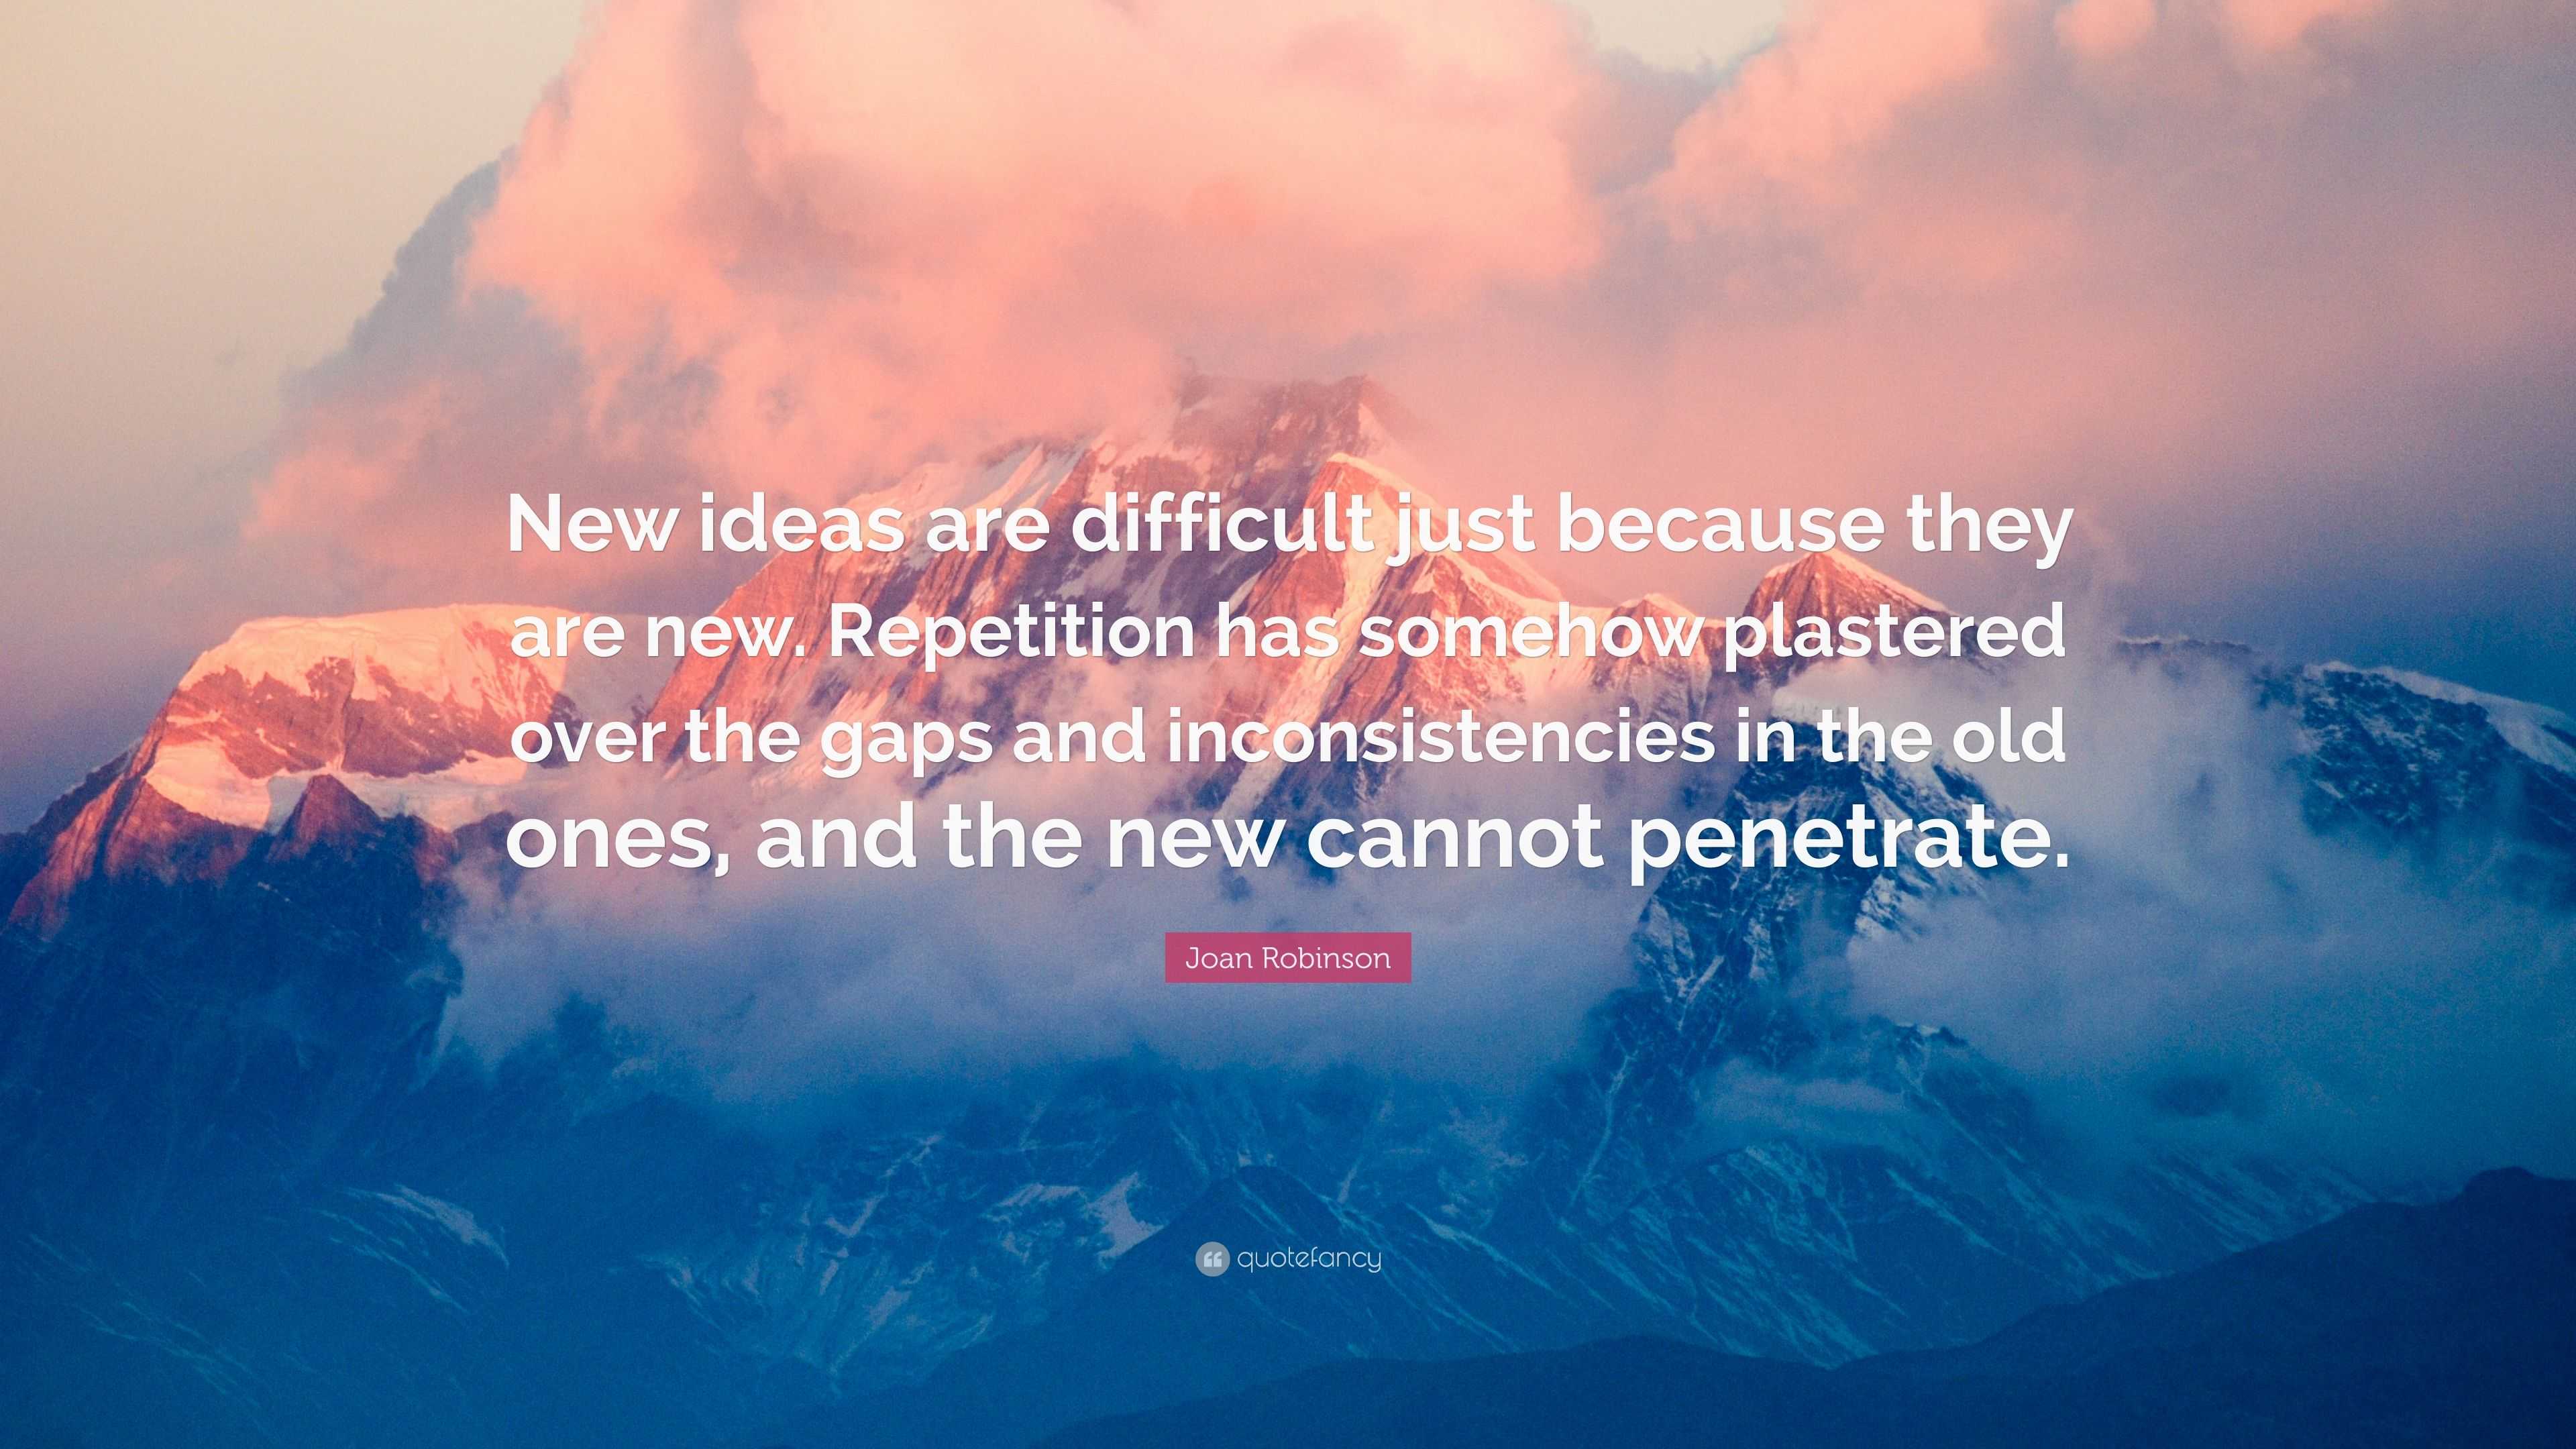 Joan Robinson Quote: “New ideas are difficult just because they are new ...